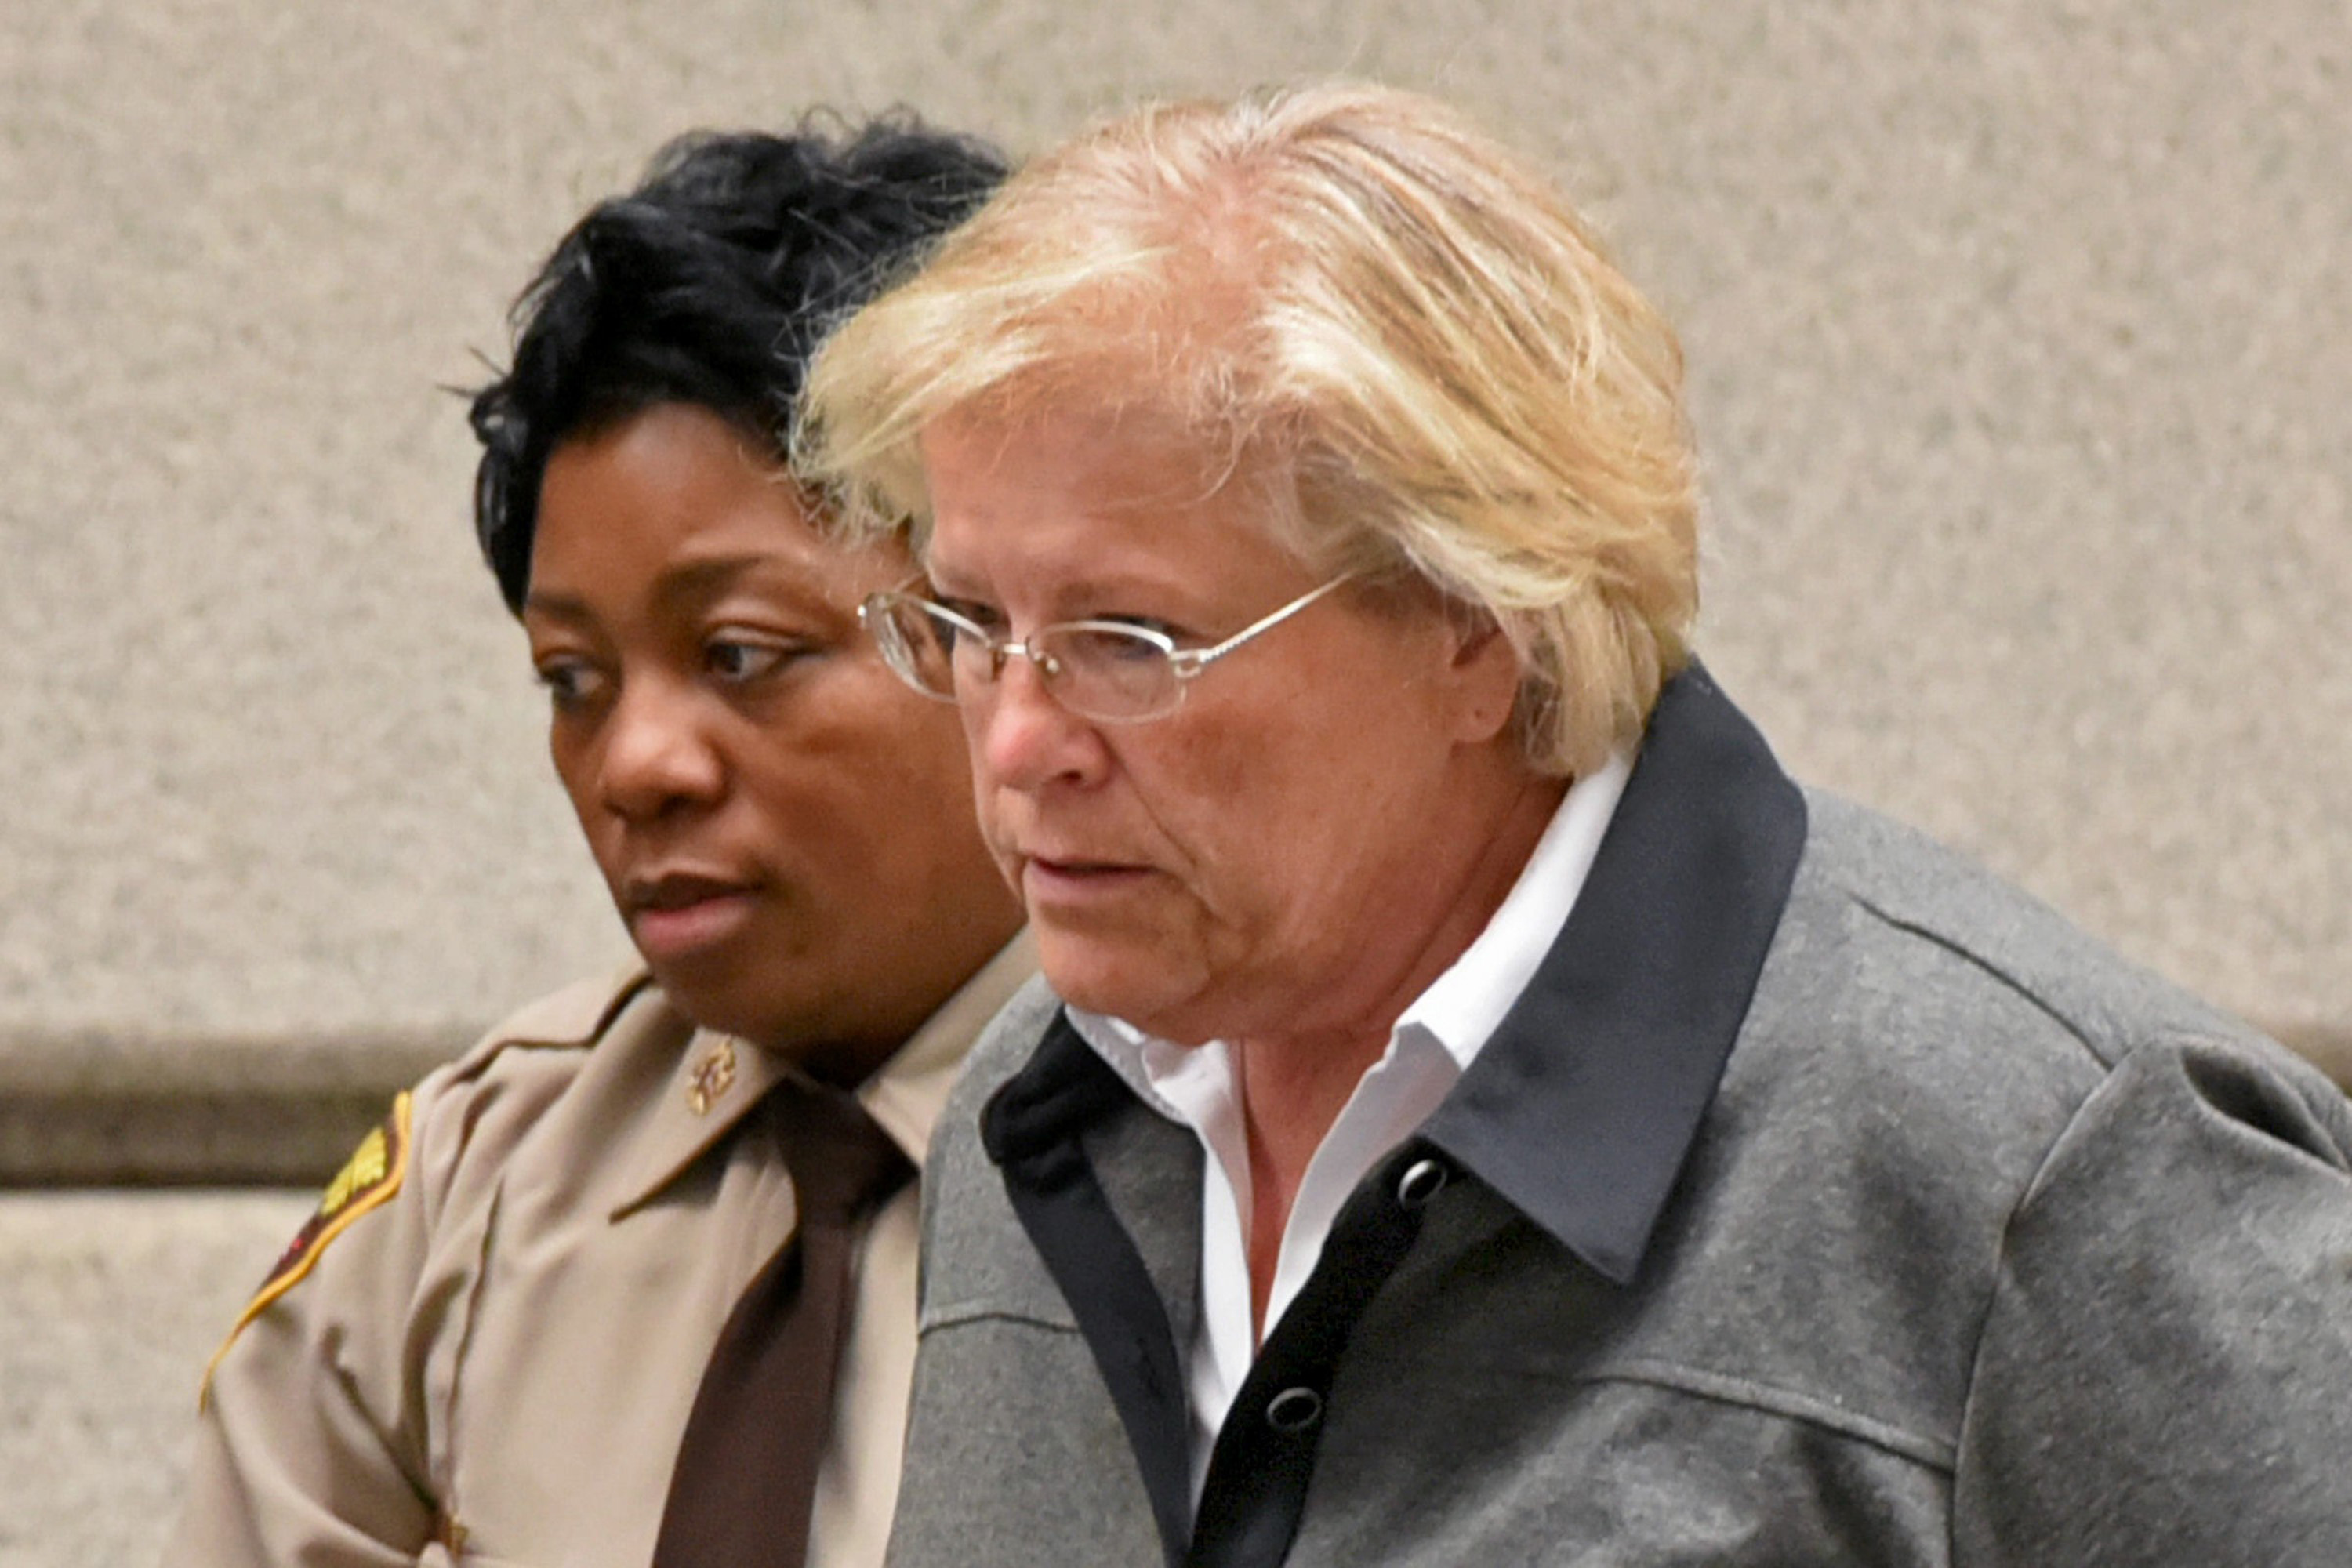 Former Episcopal Bishop Heather Cook, who pleaded guilty last month in the drunk-driving hit and run death of cyclist Thomas Palermo, is led from the courtroom after receiving a seven-year sentence on Tuesday, Oct. 27, 2015. (Baltimore Sun—TNS via Getty Images)